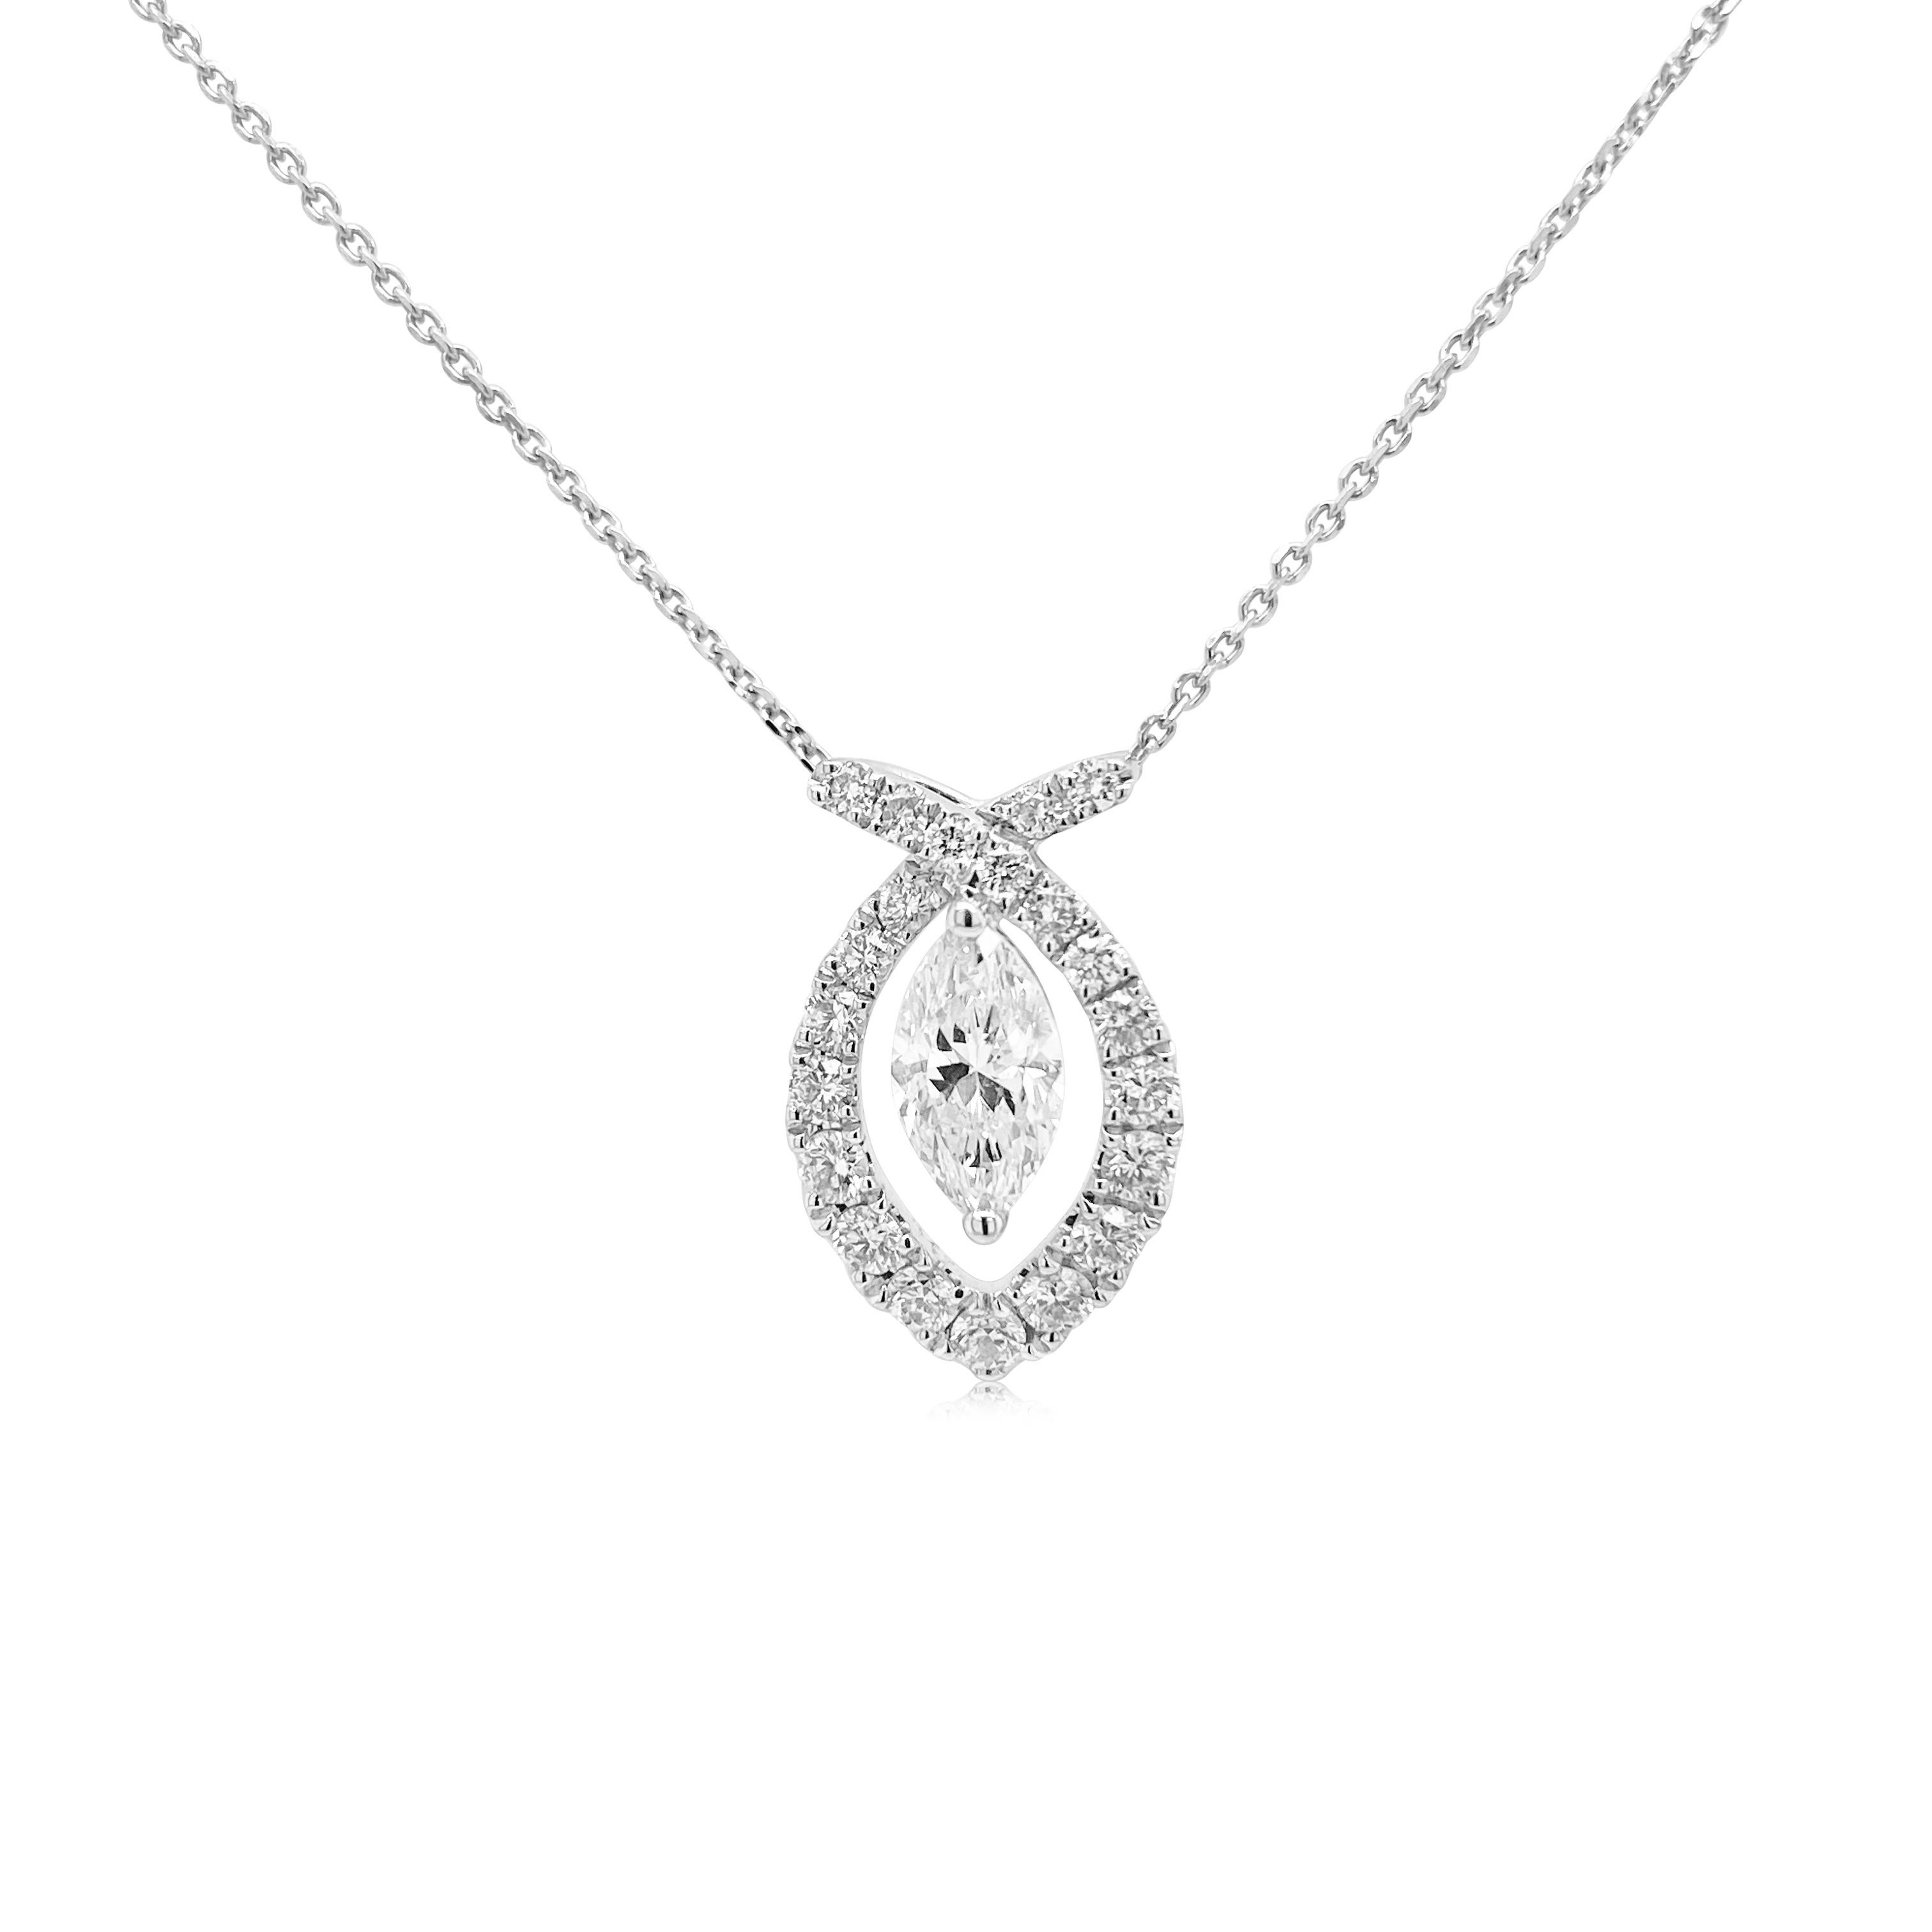 A beautiful rendition of white diamonds designed in a modern look, elegant and chic in style.

-	Centre white diamond 0.530 CT (CGL JAPAN-H7831010)
-	Round Brilliant Cut White Diamond total 0.40 carat 
-	18K White Gold , Platinum Chain

HYT Jewelry